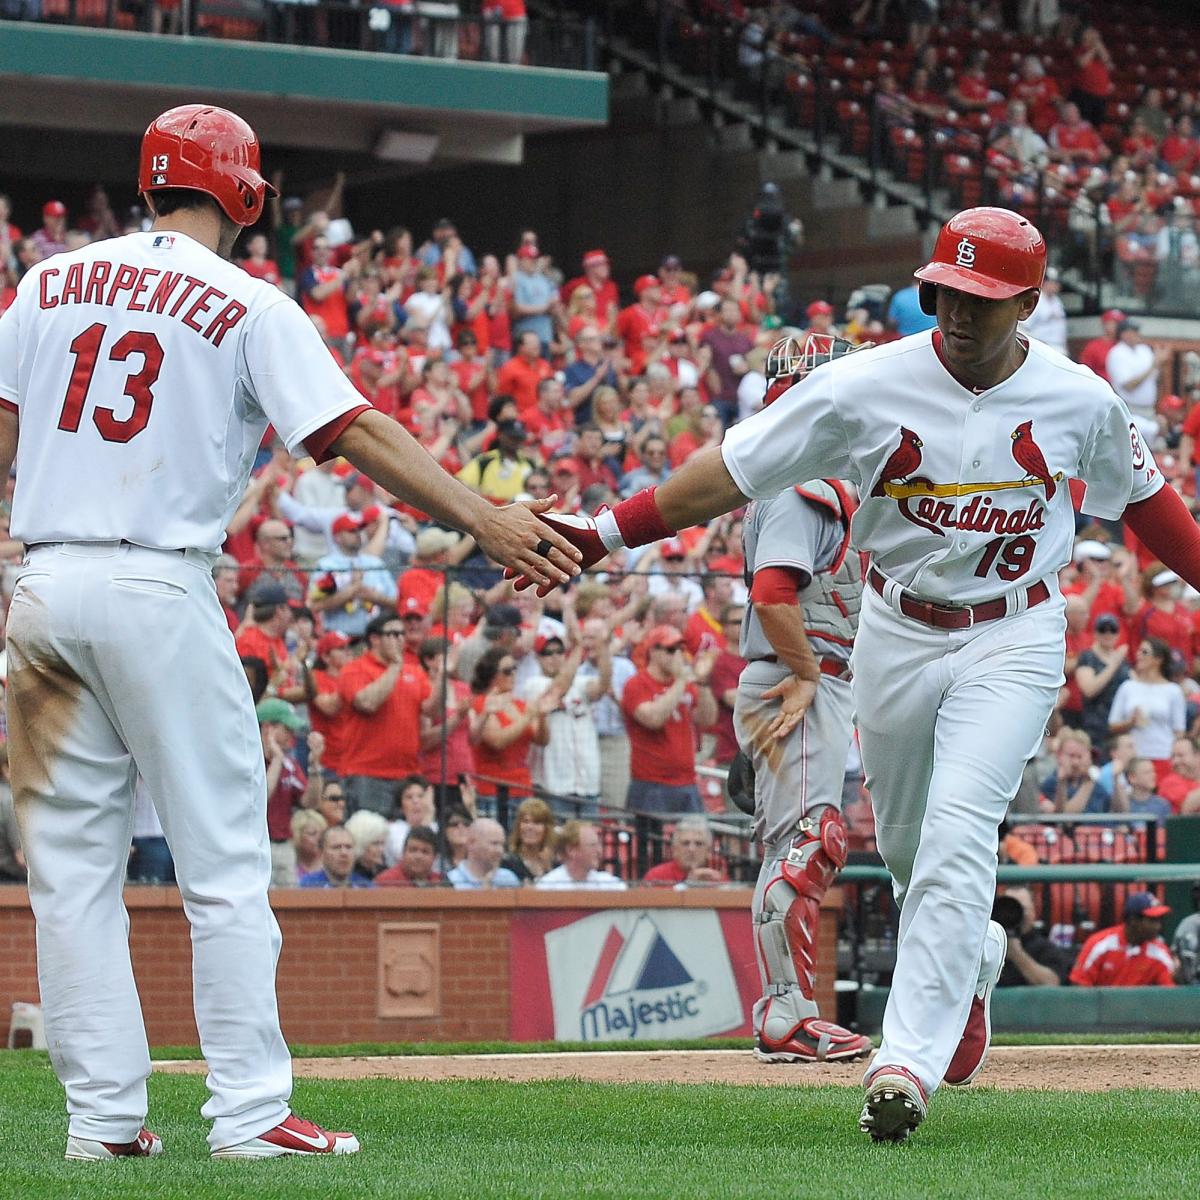 5 Takeaways from the First CardinalsReds Rivalry Clash of 2013 News